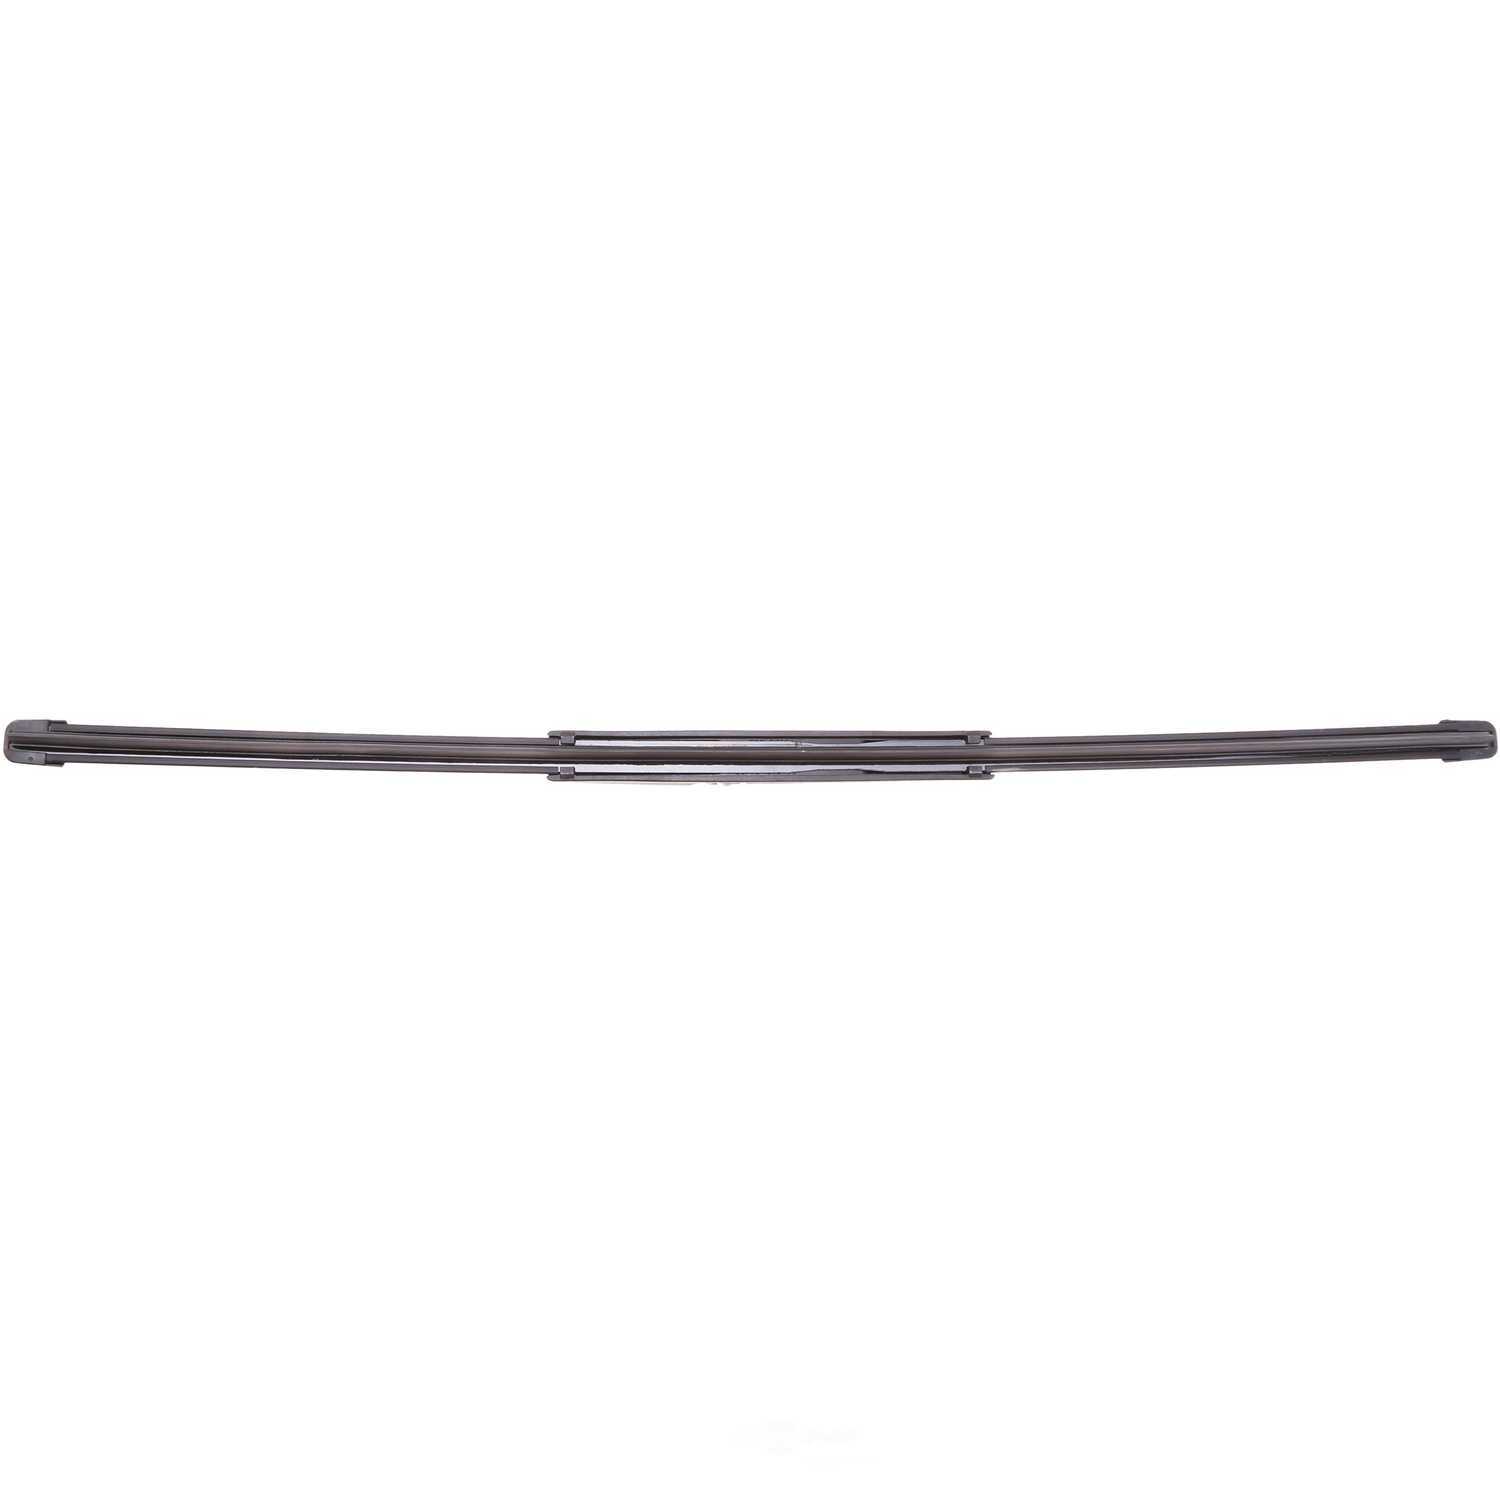 ACDELCO GOLD/PROFESSIONAL - Beam - DCC 8-992213